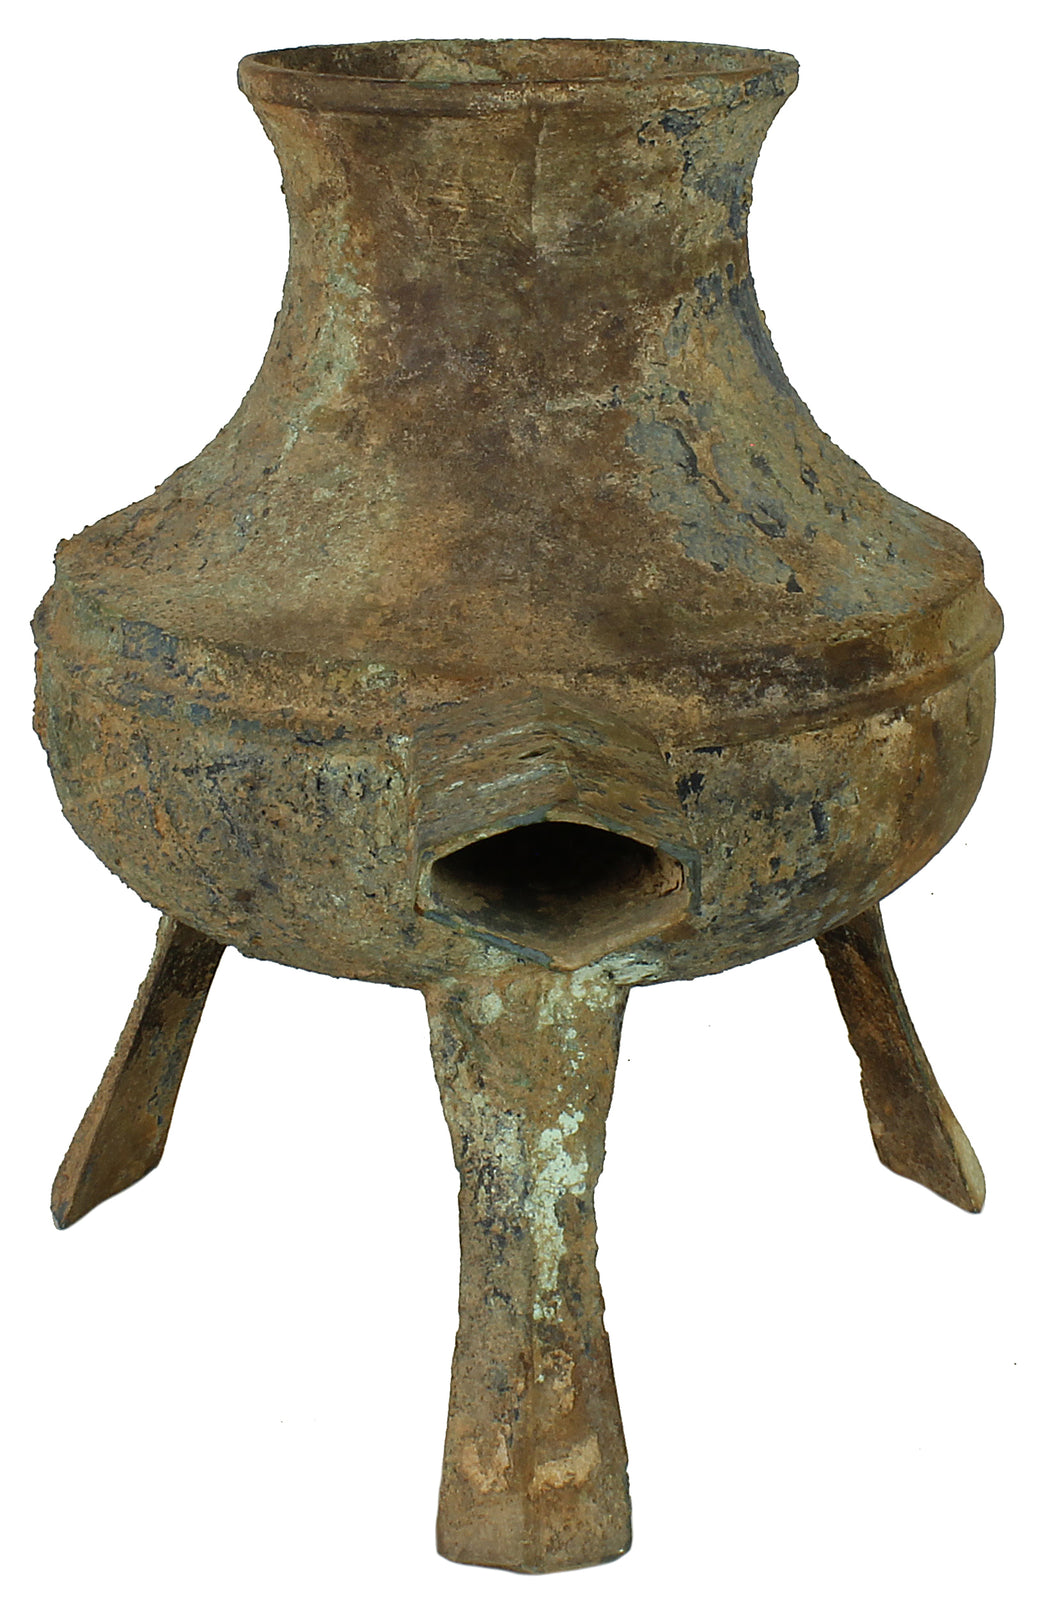 Historic Dong Son Bronze Pot Artifact from Bronze Age - 2000+ Years Old - Niger Bend